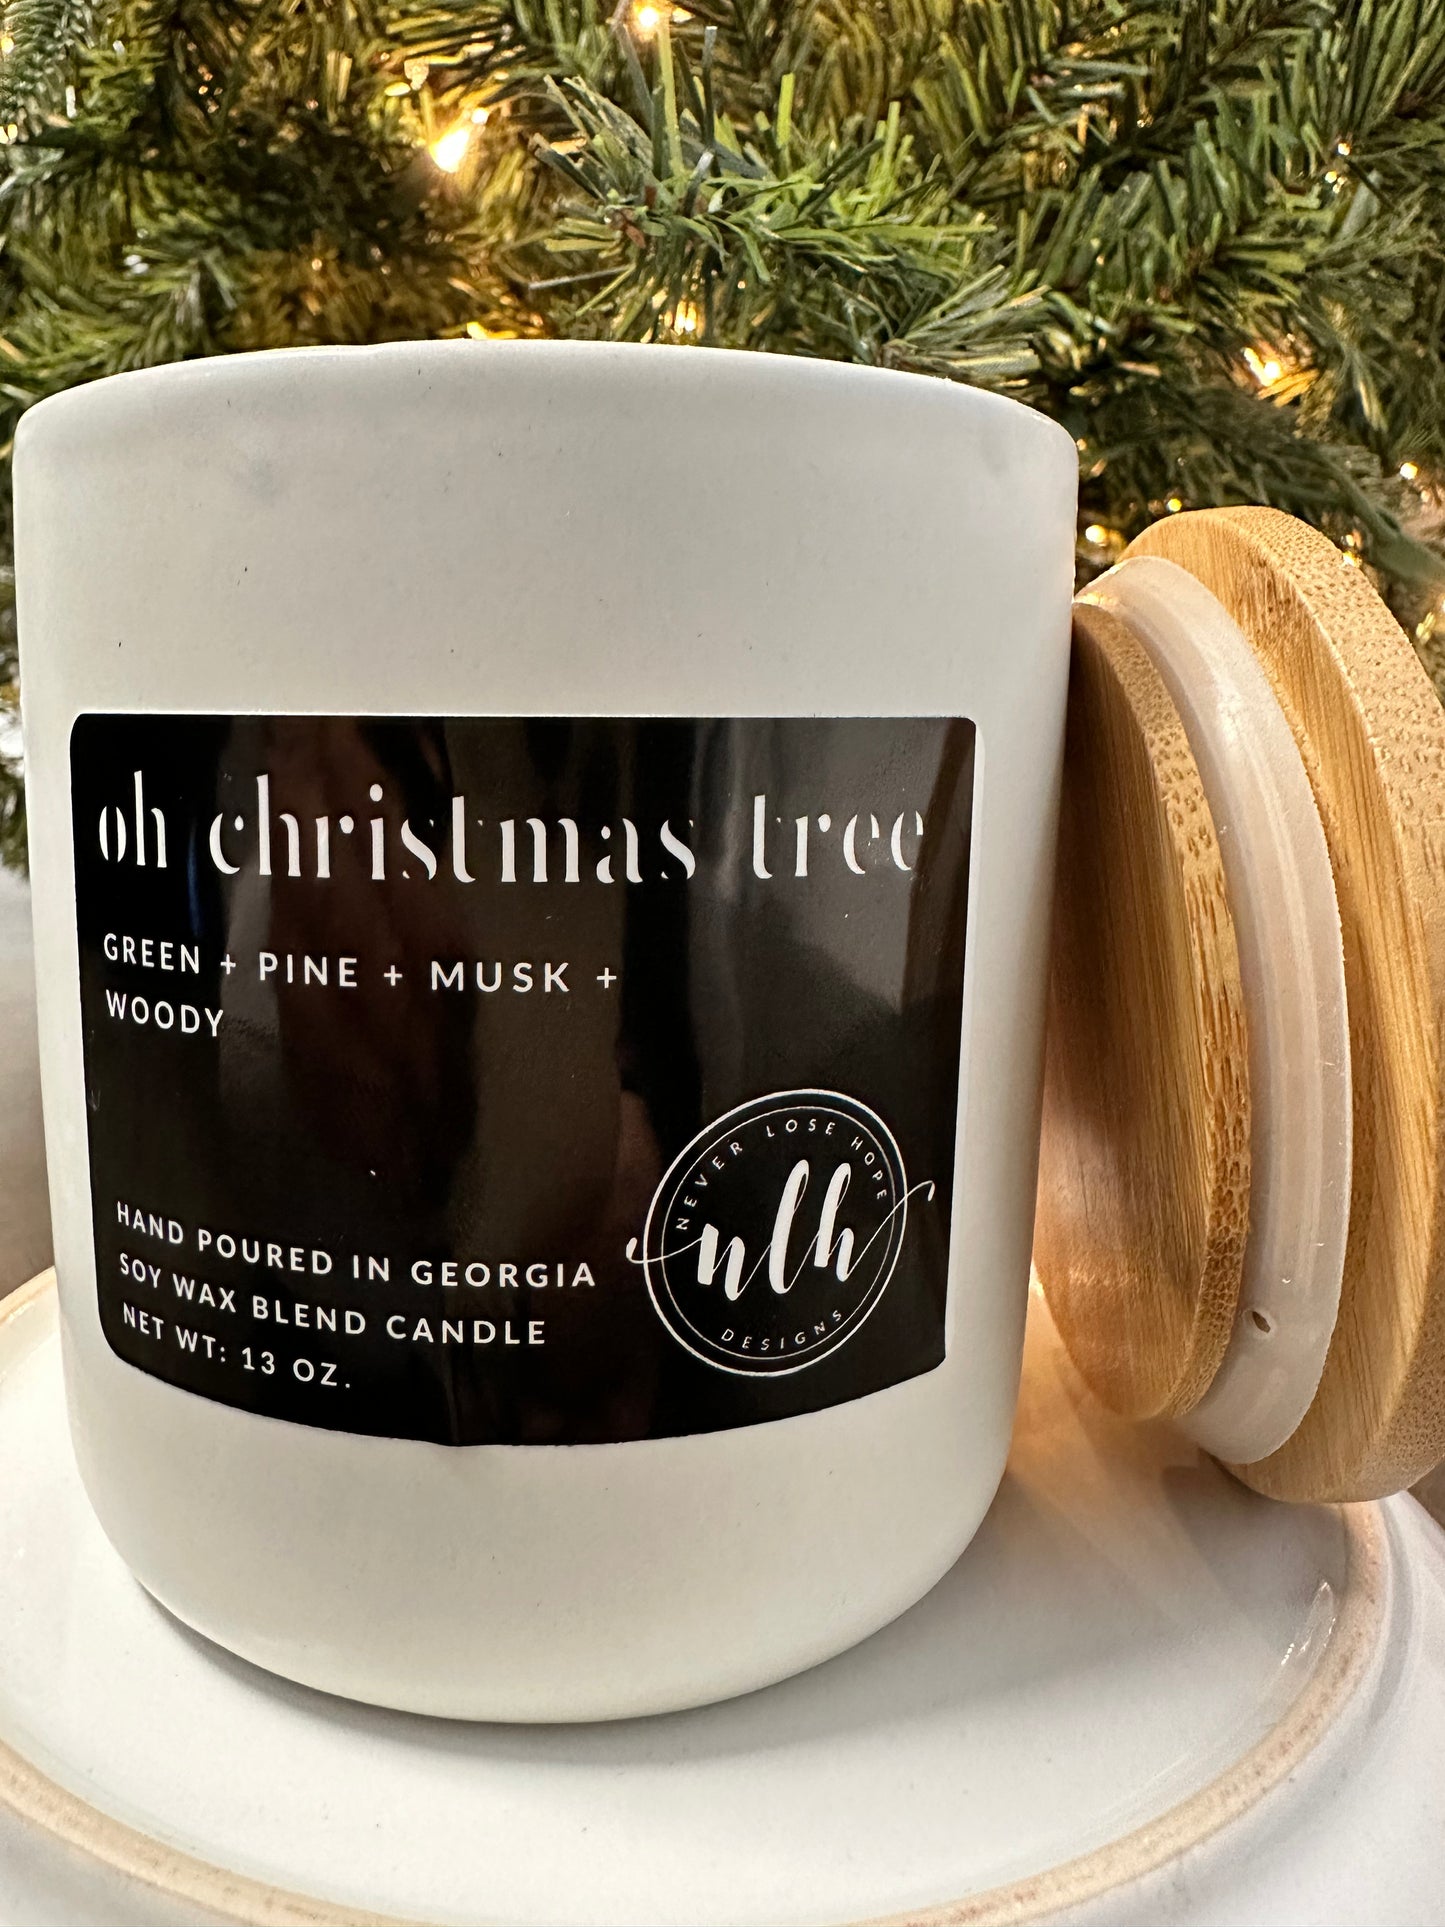 Never Lose Hope® Soy Wax Blend Candle- "Oh Christmas Tree"